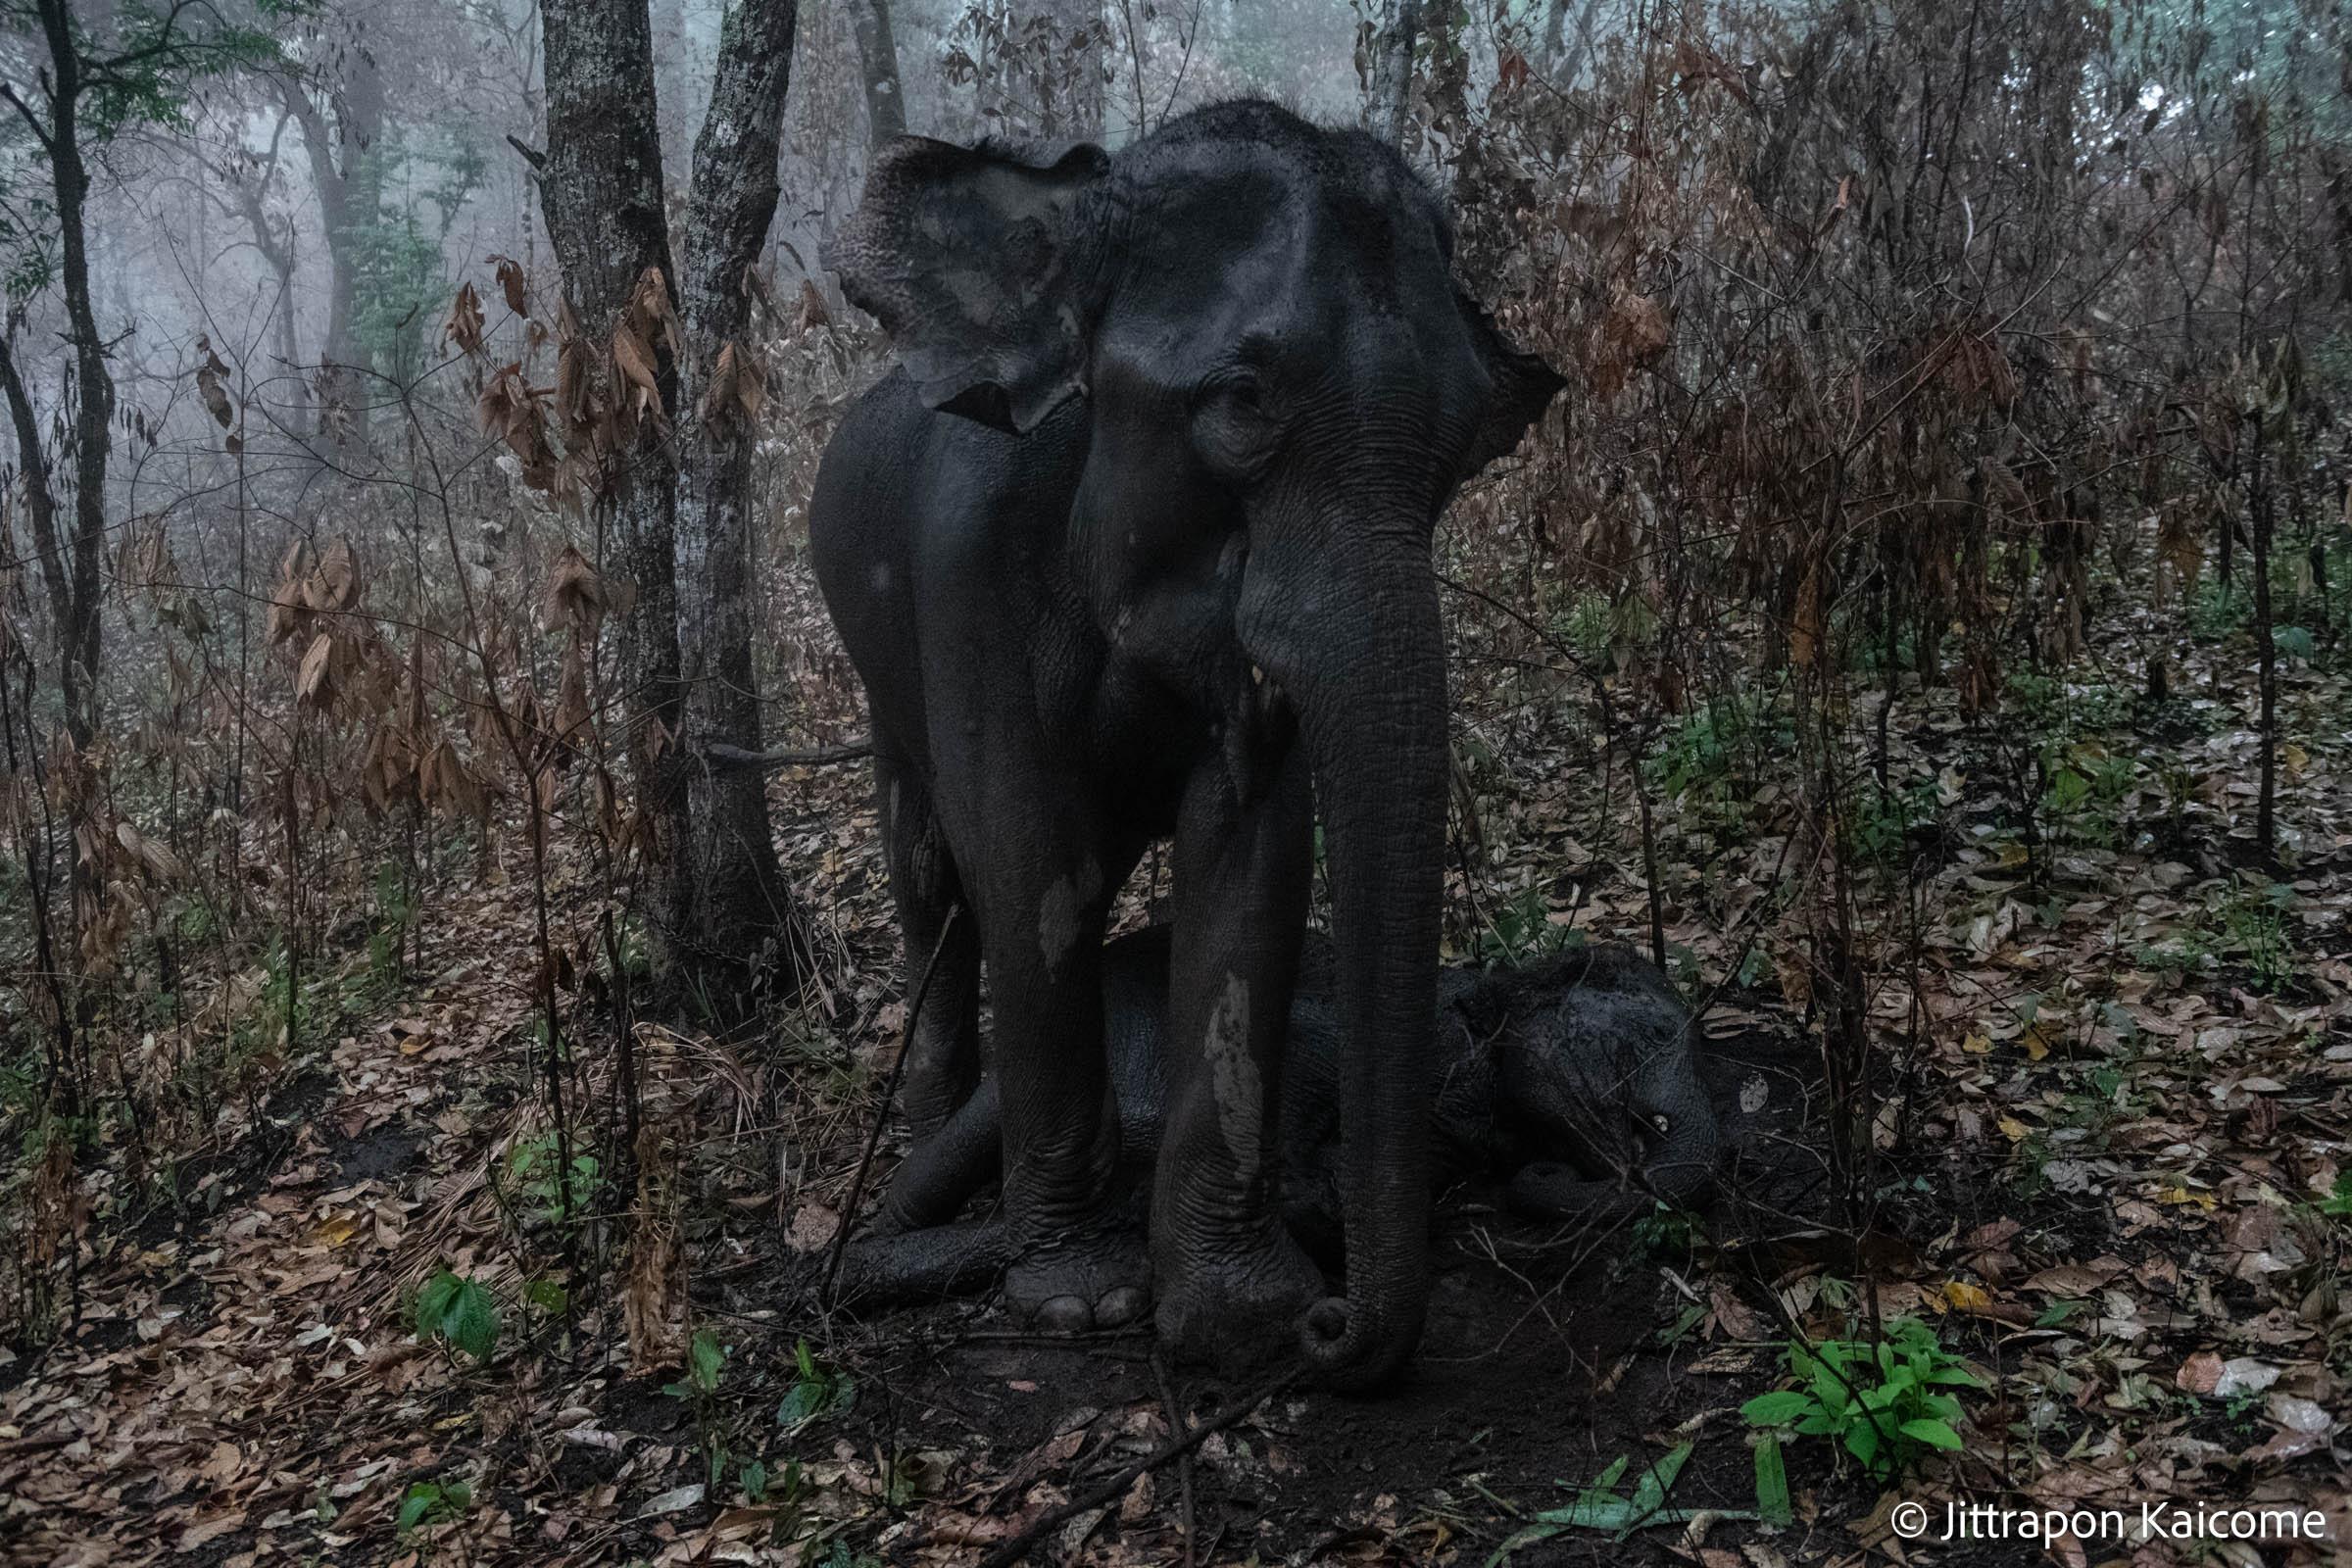 The Unexpected Change - The baby elephant slept beneath its mother. They were...